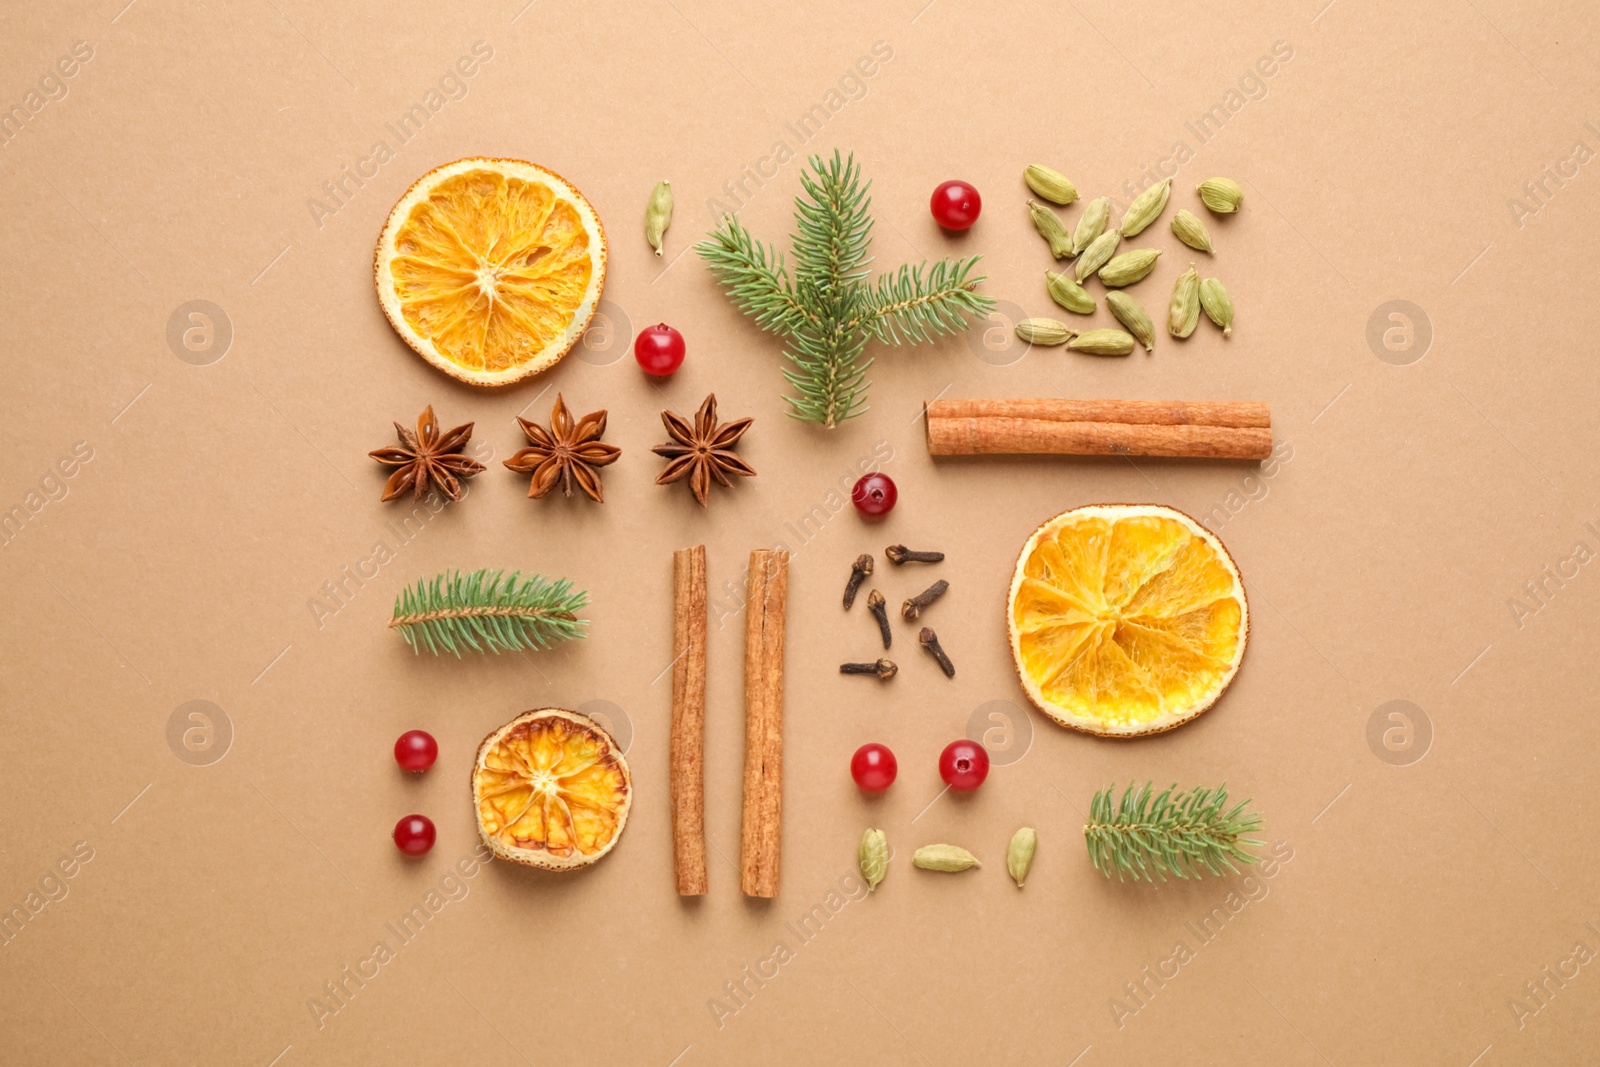 Photo of Flat lay composition with mulled wine ingredients and fir branches on brown background